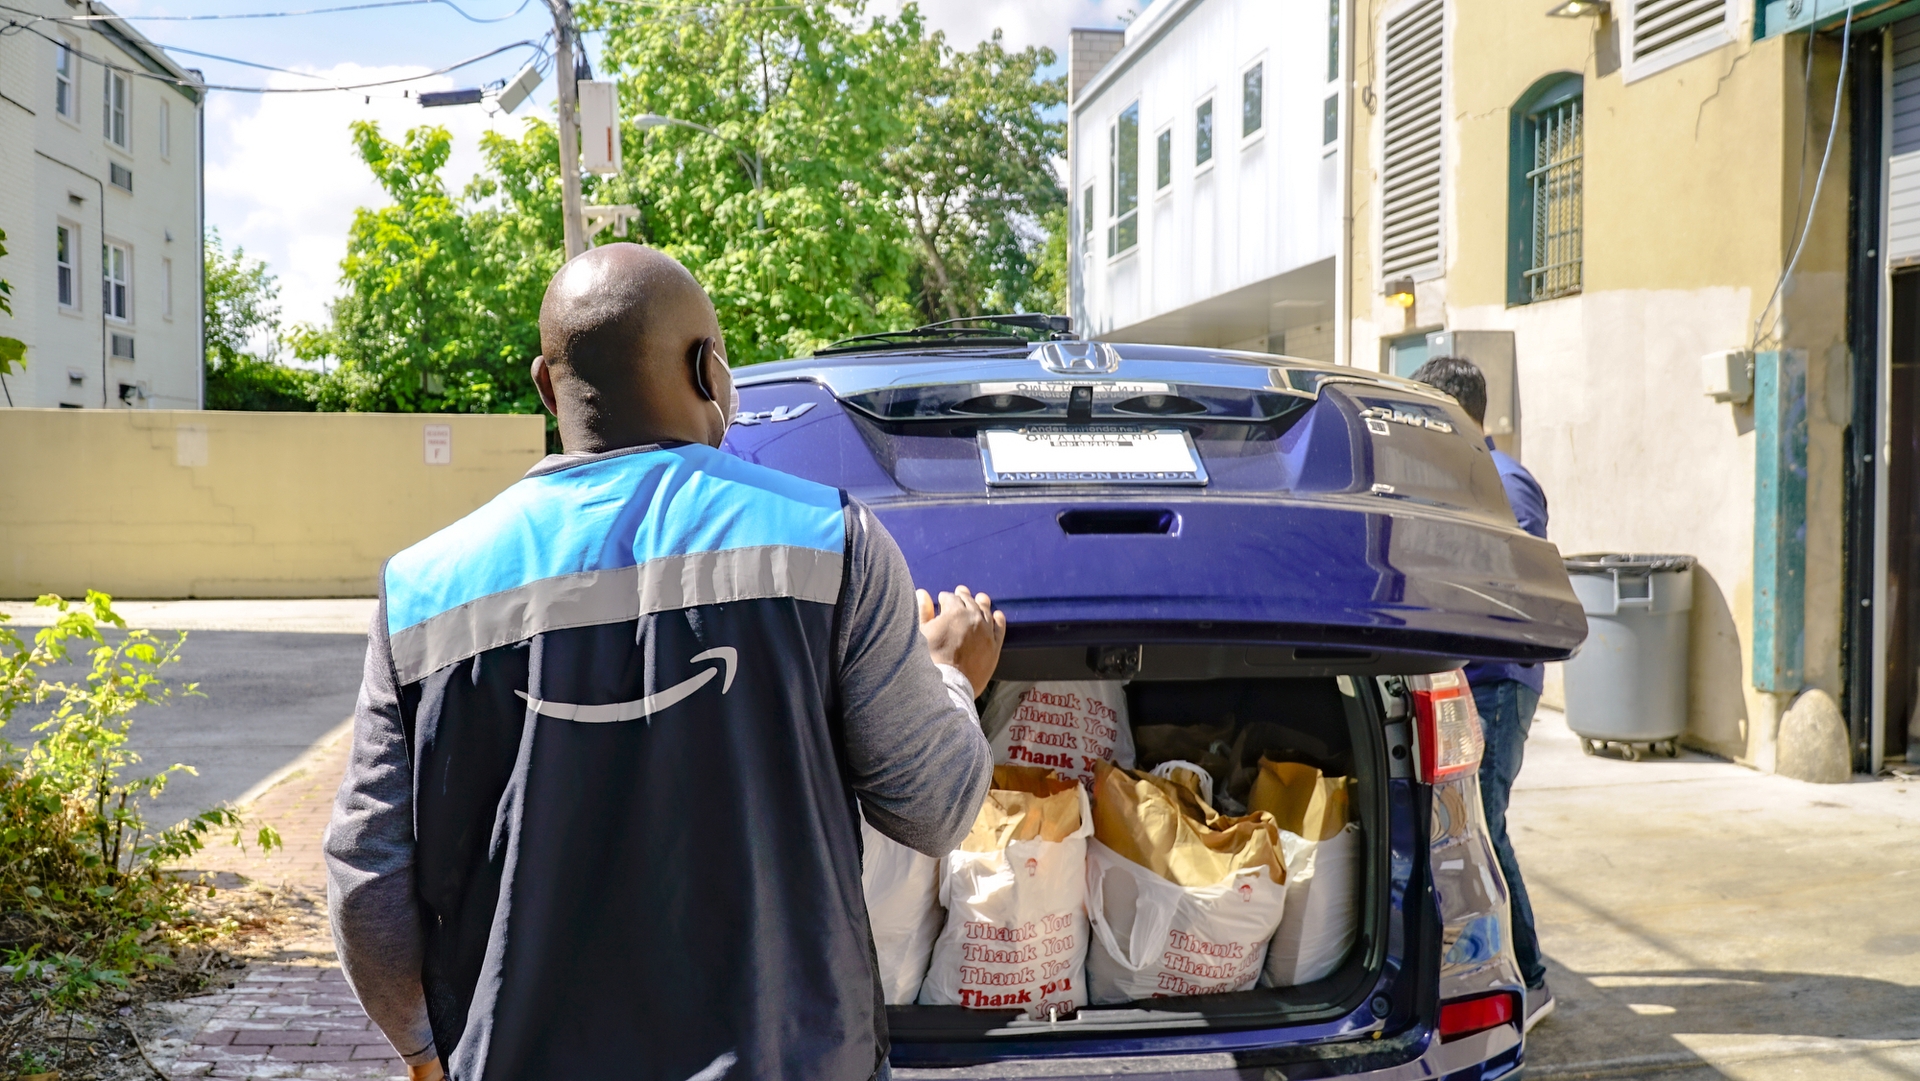 A man in a vest with the Amazon smile logo closes the back of a car filled with bags of groceries.